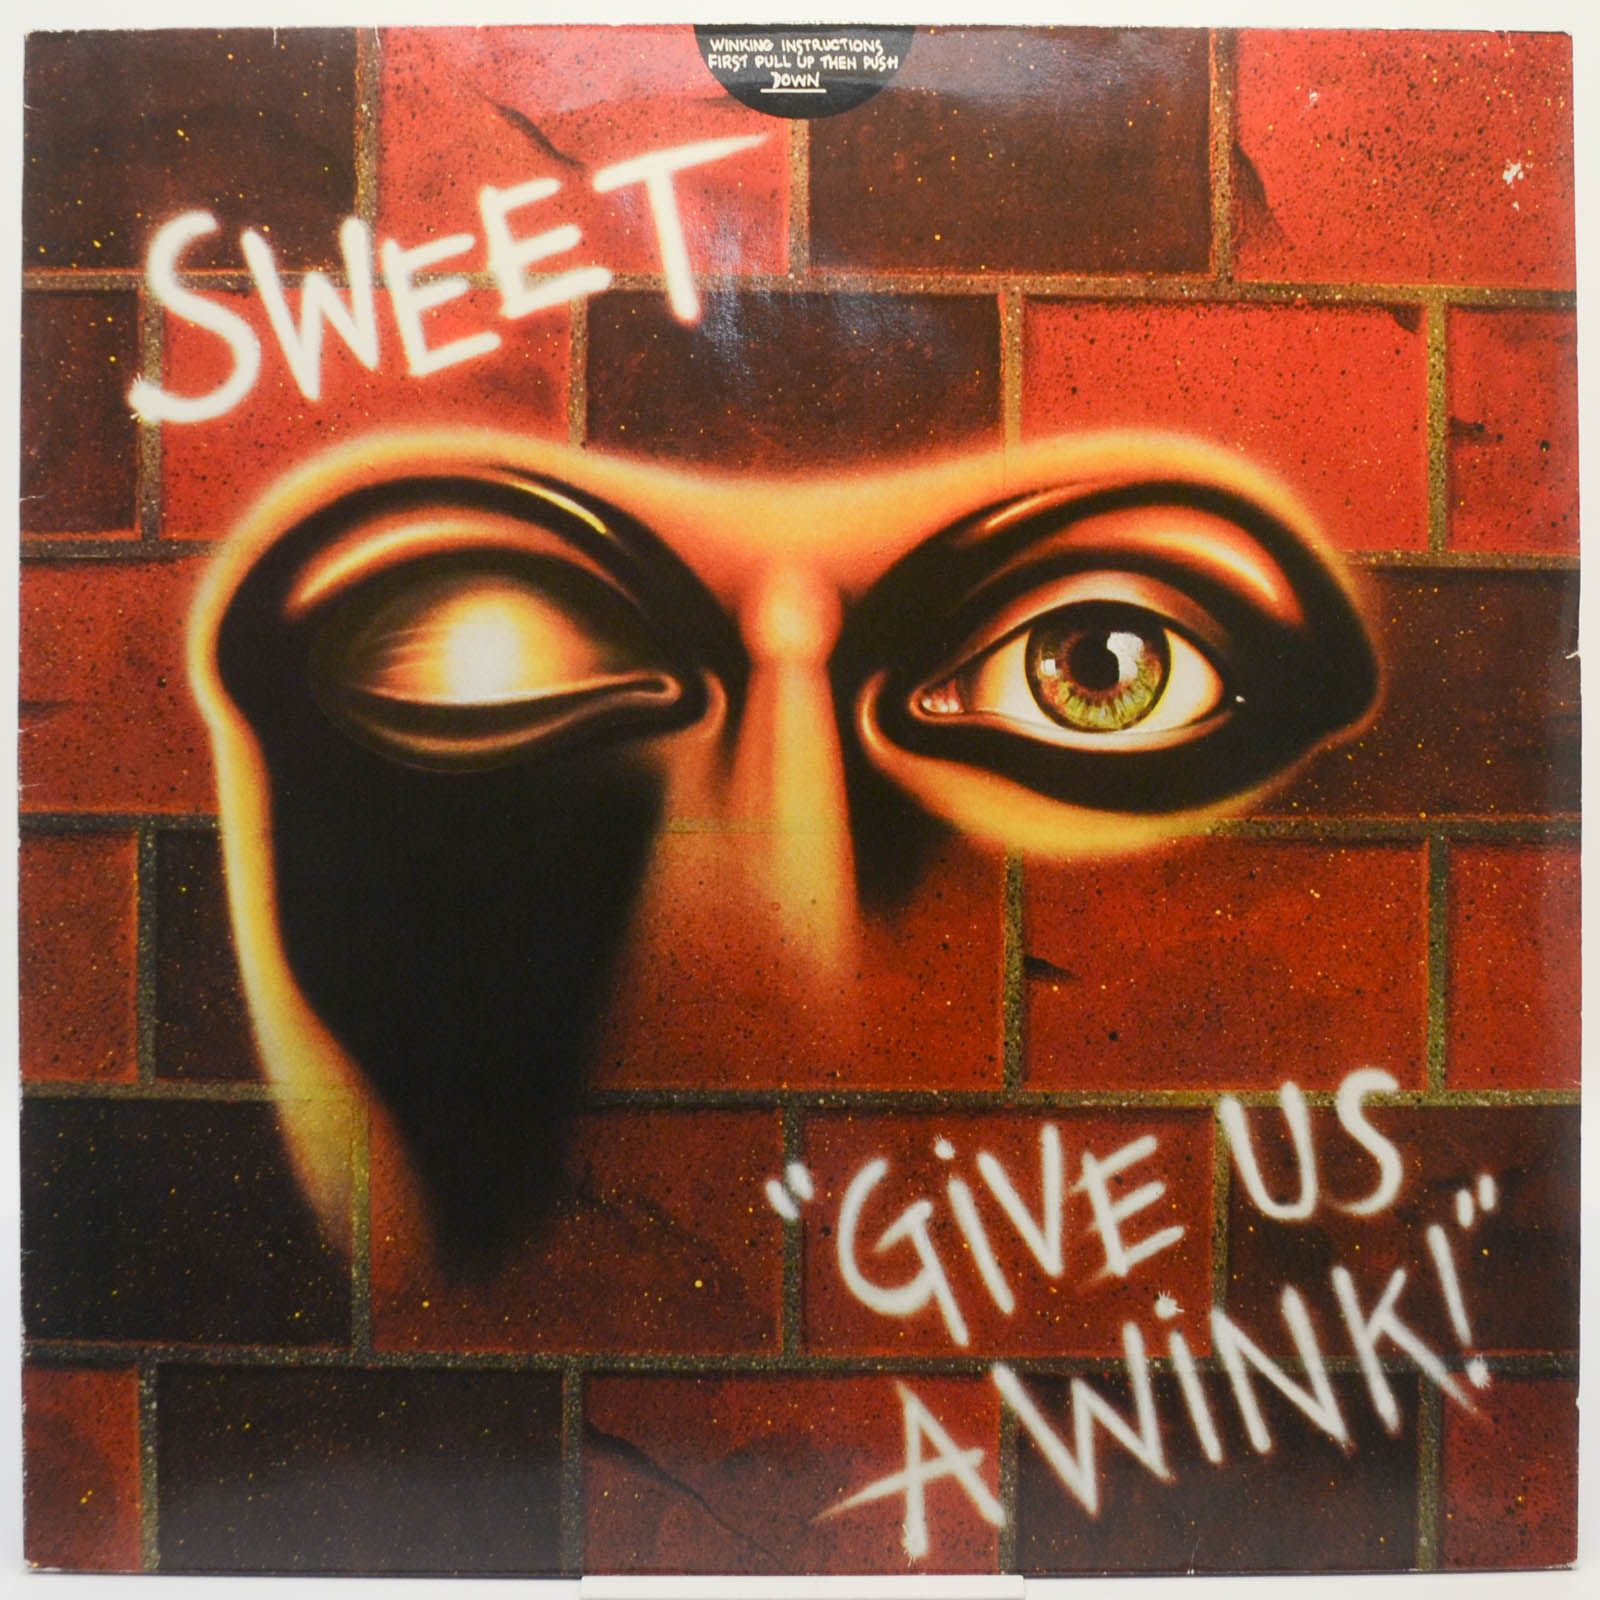 Sweet — Give Us A Wink, 1976